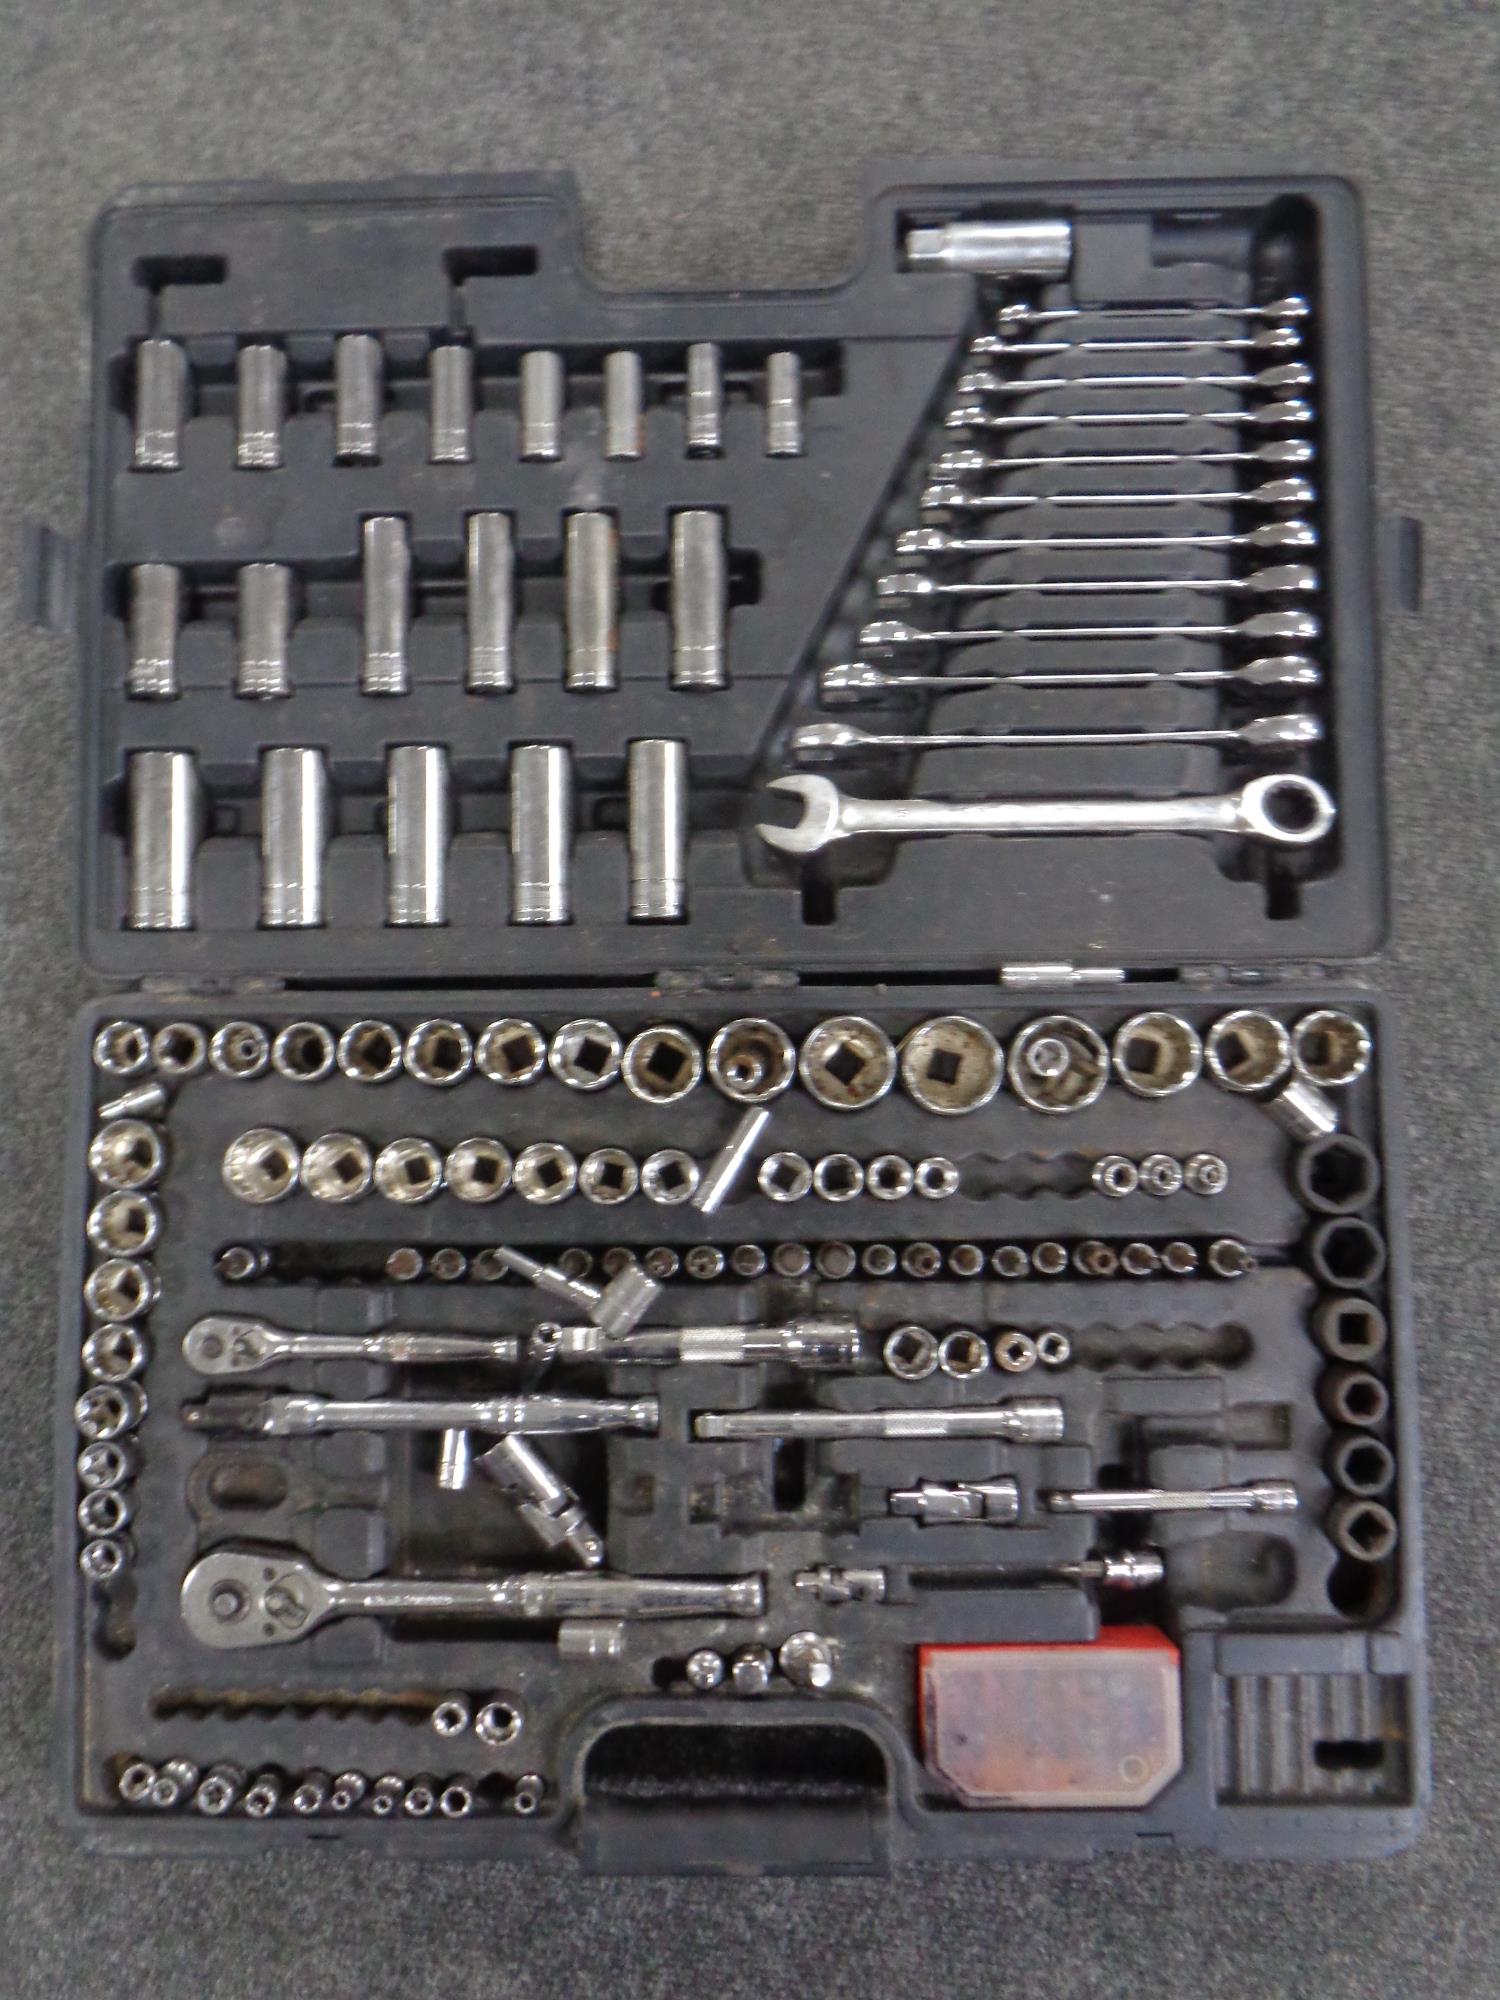 A Halfords advanced tool kit in case